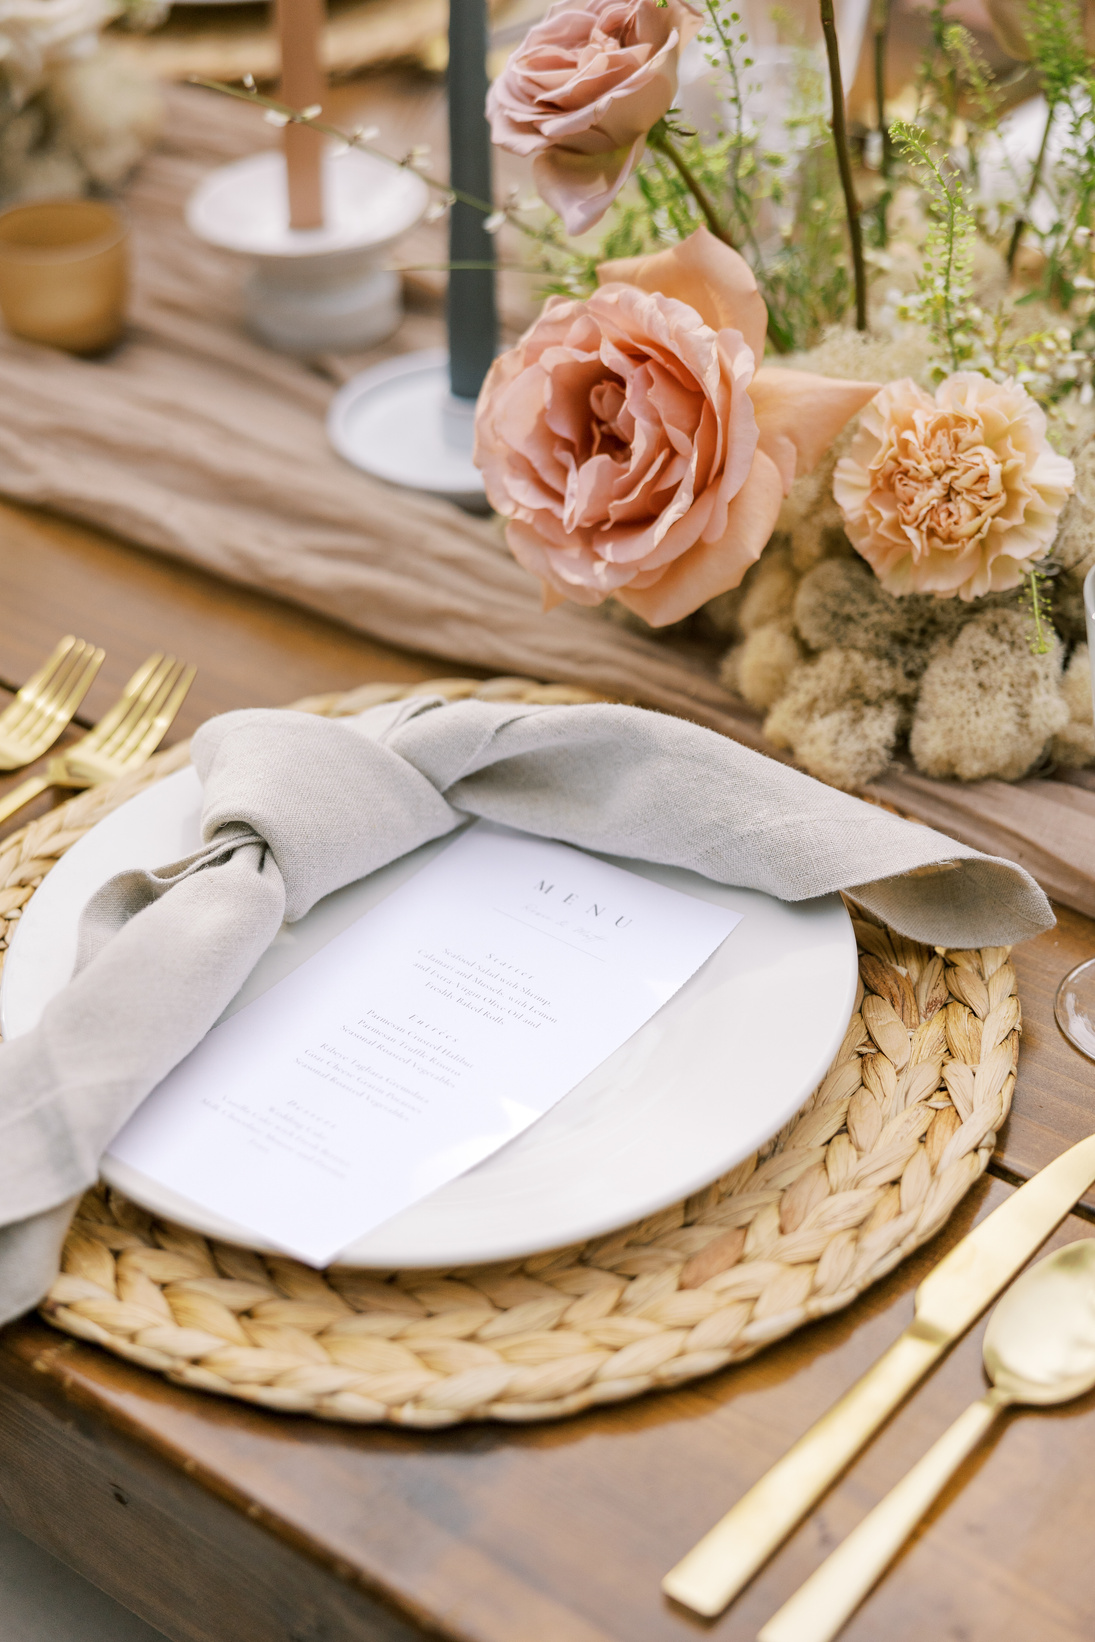 Menu on a Plate with Napkin on Table with Flowers